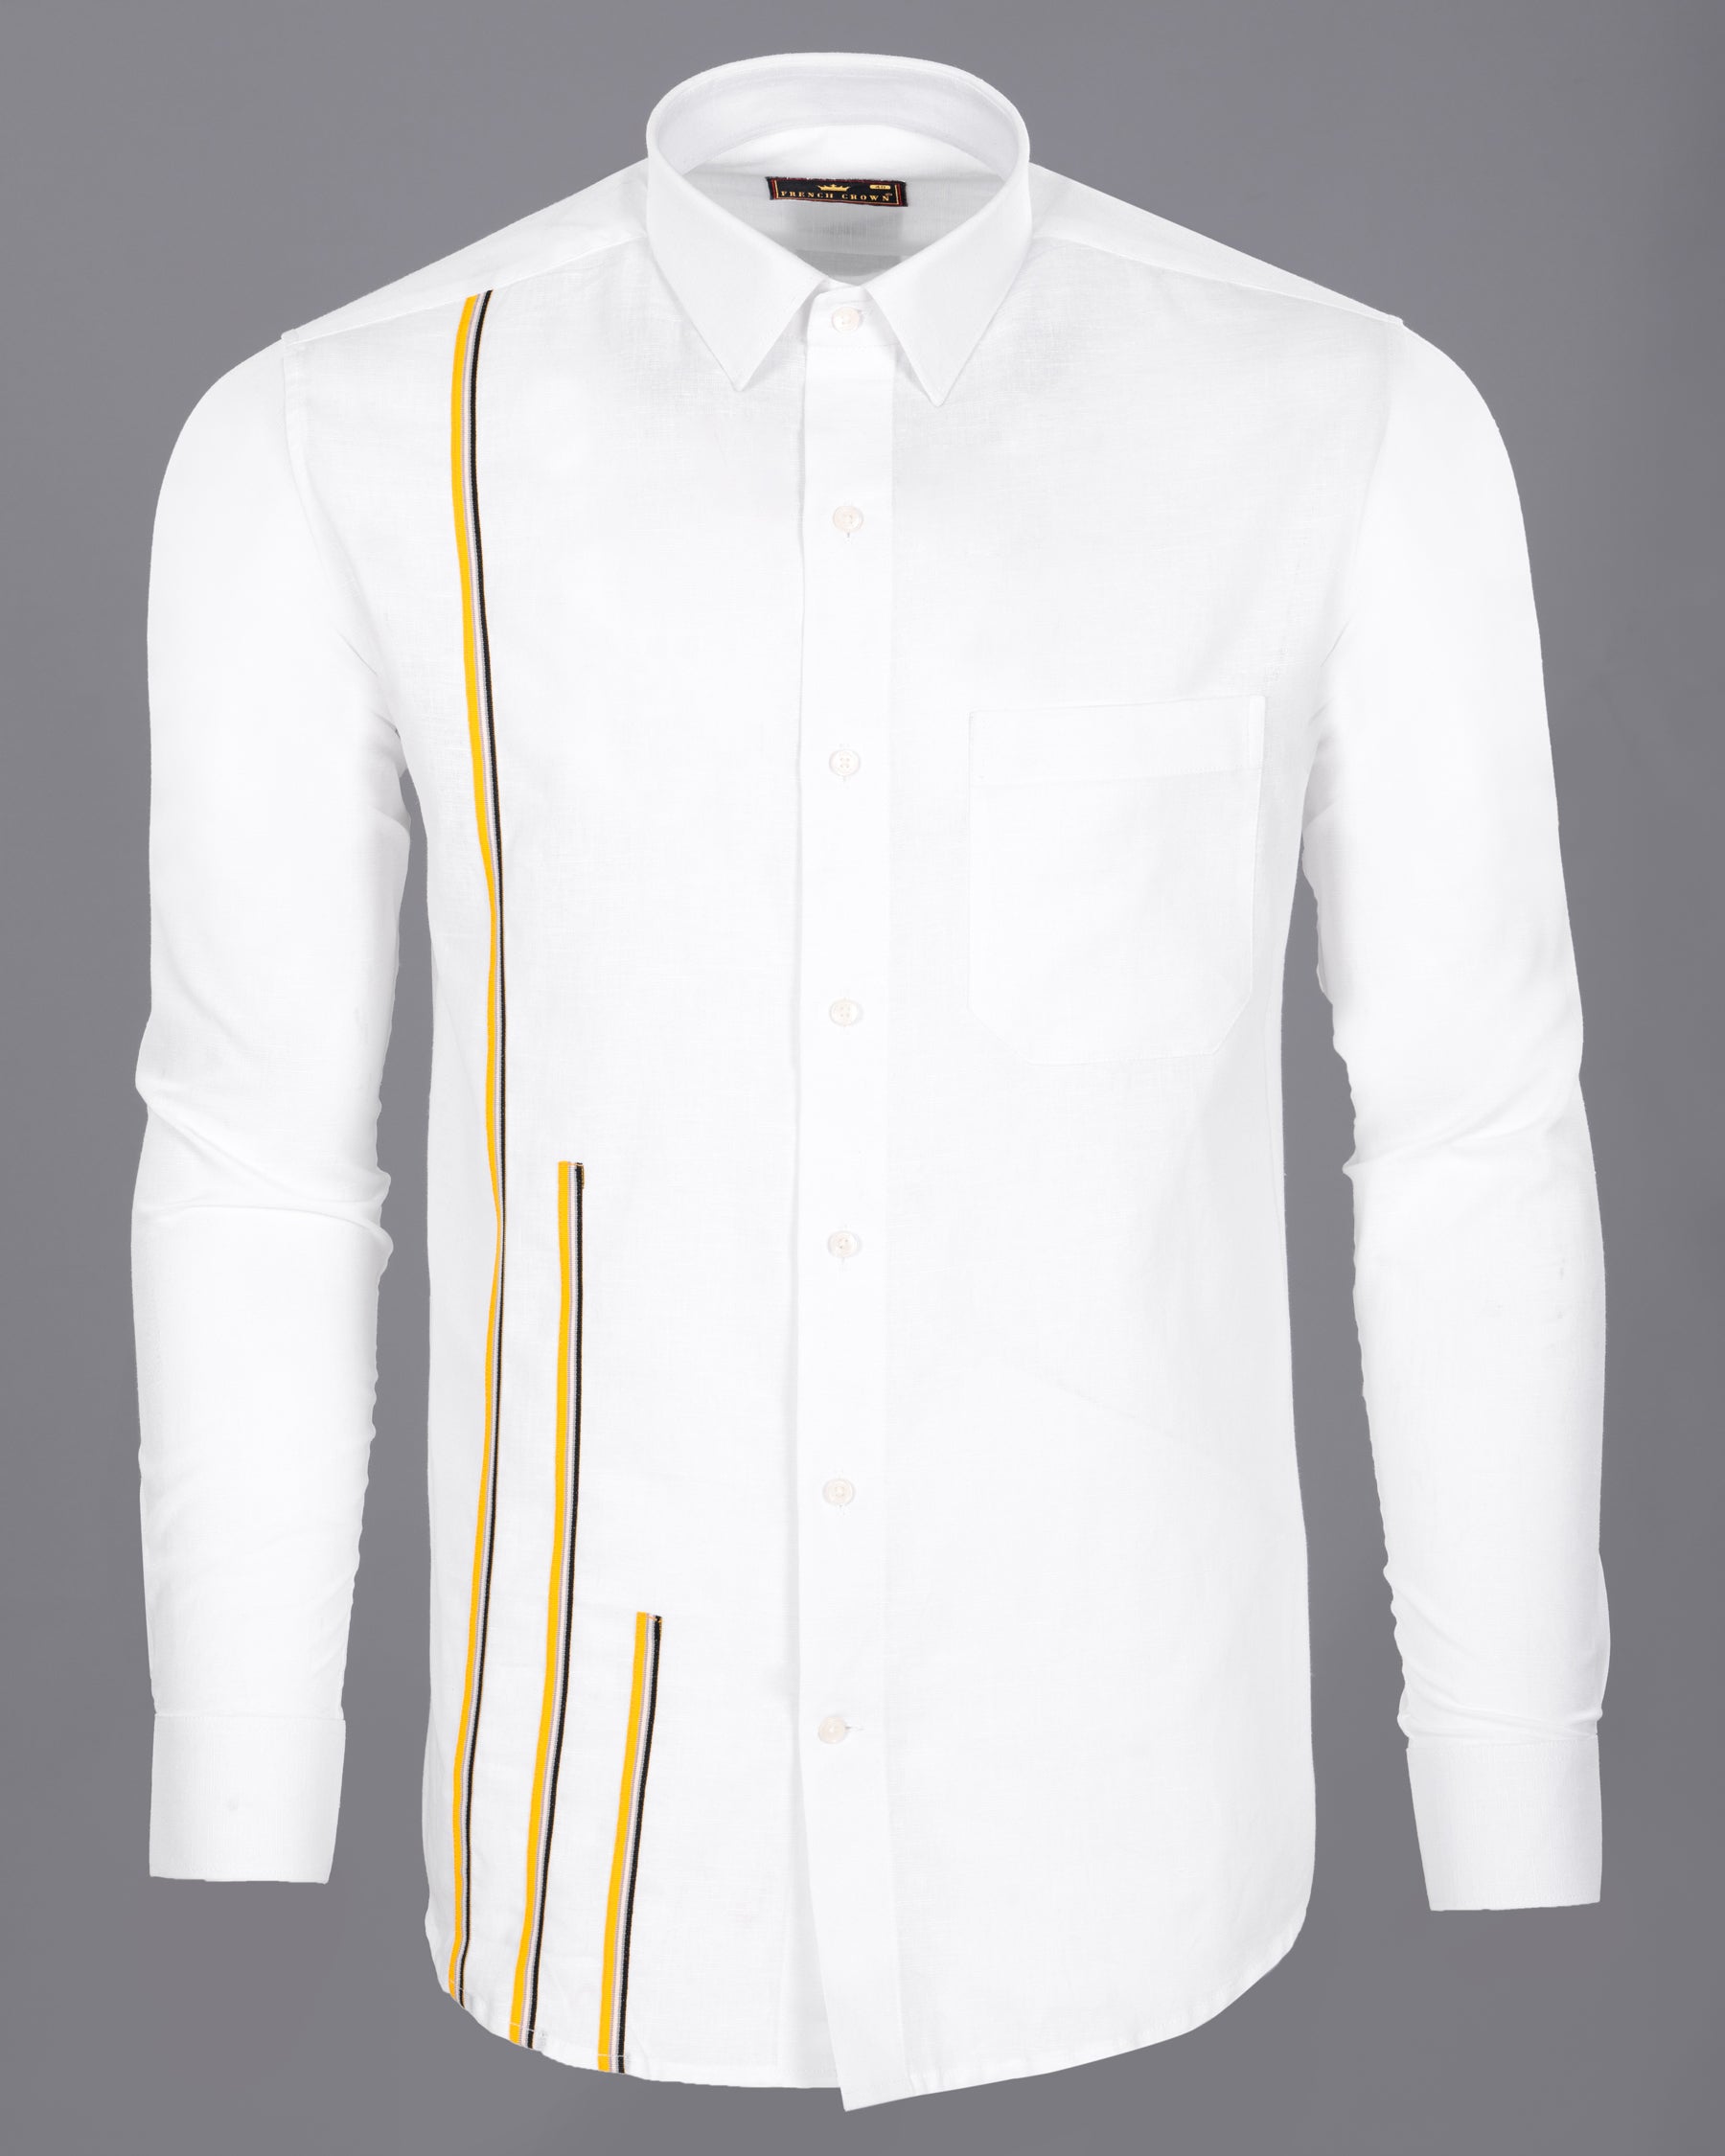 Bright White with Salomie and Black Triple Piping Luxurious Linen Shirt 4948-P52-38, 4948-P52-H-38, 4948-P52-39, 4948-P52-H-39, 4948-P52-40, 4948-P52-H-40, 4948-P52-42, 4948-P52-H-42, 4948-P52-44, 4948-P52-H-44, 4948-P52-46, 4948-P52-H-46, 4948-P52-48, 4948-P52-H-48, 4948-P52-50, 4948-P52-H-50, 4948-P52-52, 4948-P52-H-52